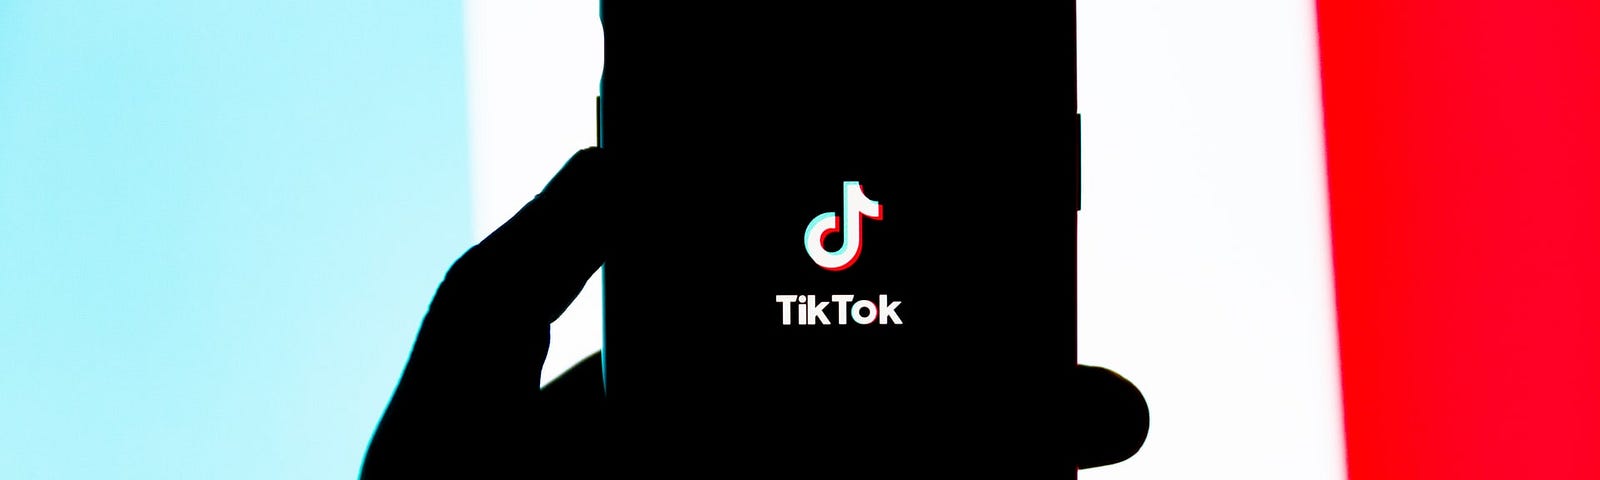 IMAGE: A hand holding a smartphone with the TikTok logo, all in black silhouette over the colors of the TikTok logo